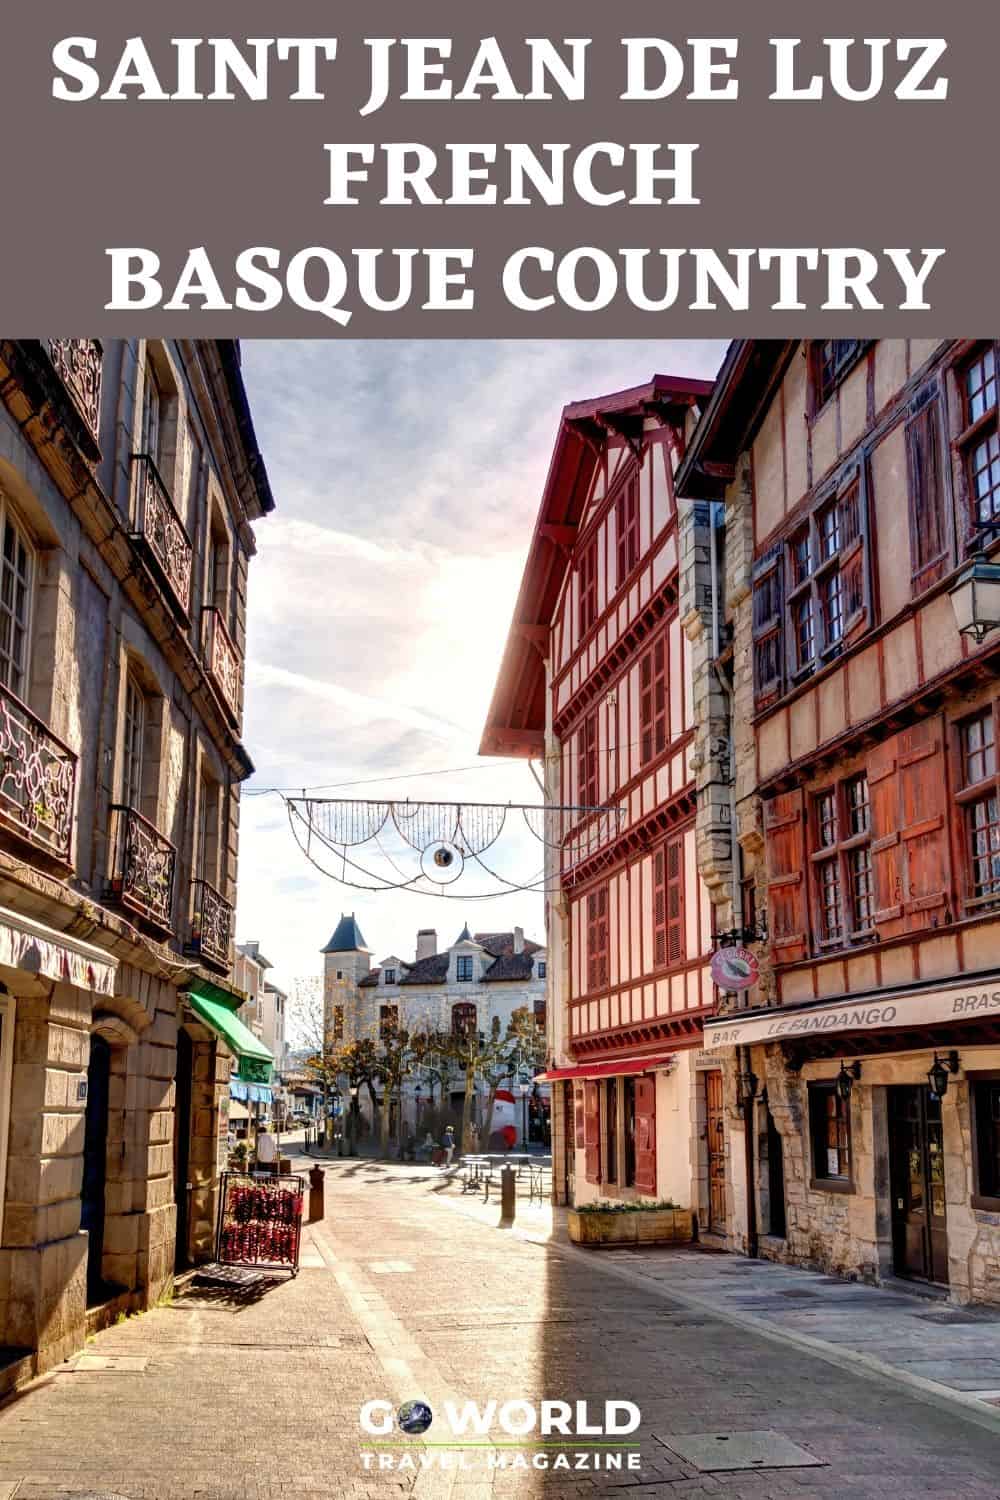 Saint Jean de Luz, once home to whalers turned pirates and now a popular beach holiday destination with stunning French Basque architecture. #Basquecountry #travelinfrance